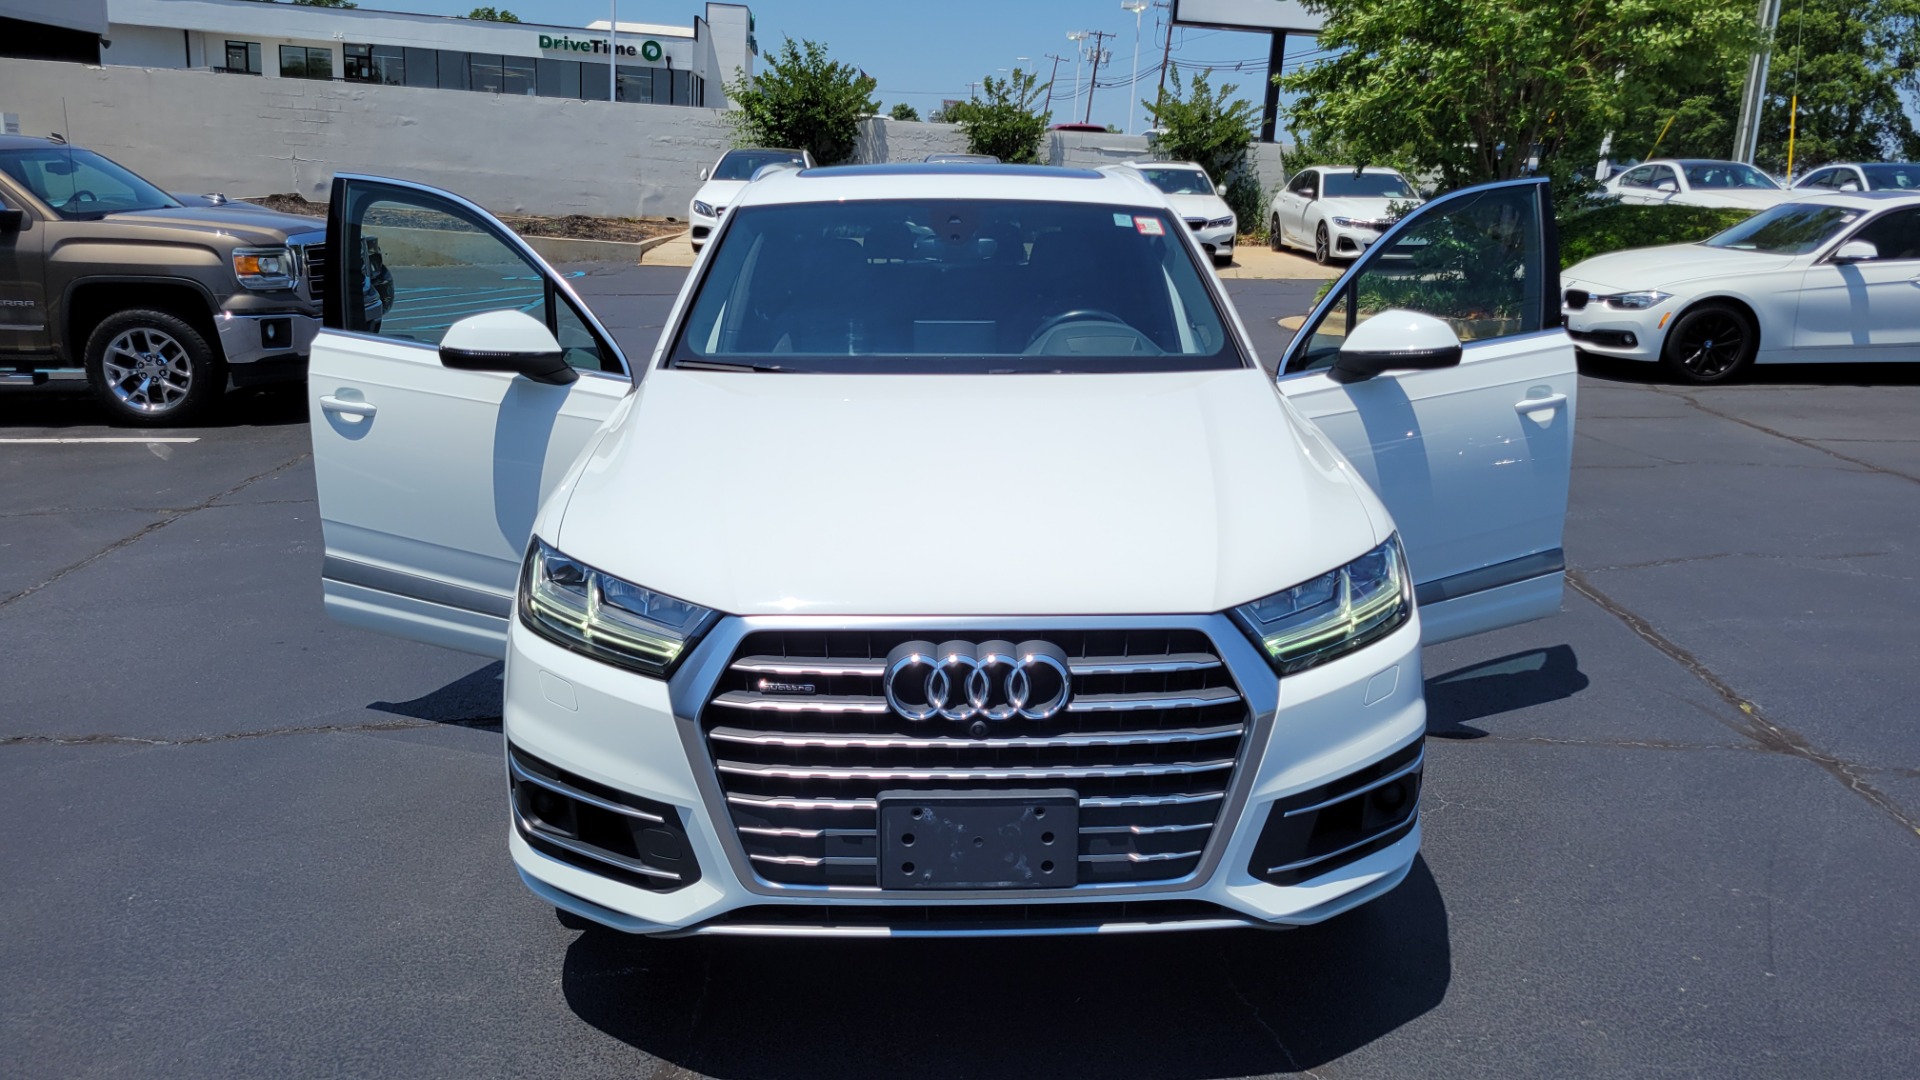 Used 2017 Audi Q7 PRESTIGE 3.0L SUV / NAV / DRVR ASST / CLD WTHR / SUNROOF / TOW / 3-ROW for sale $42,395 at Formula Imports in Charlotte NC 28227 29